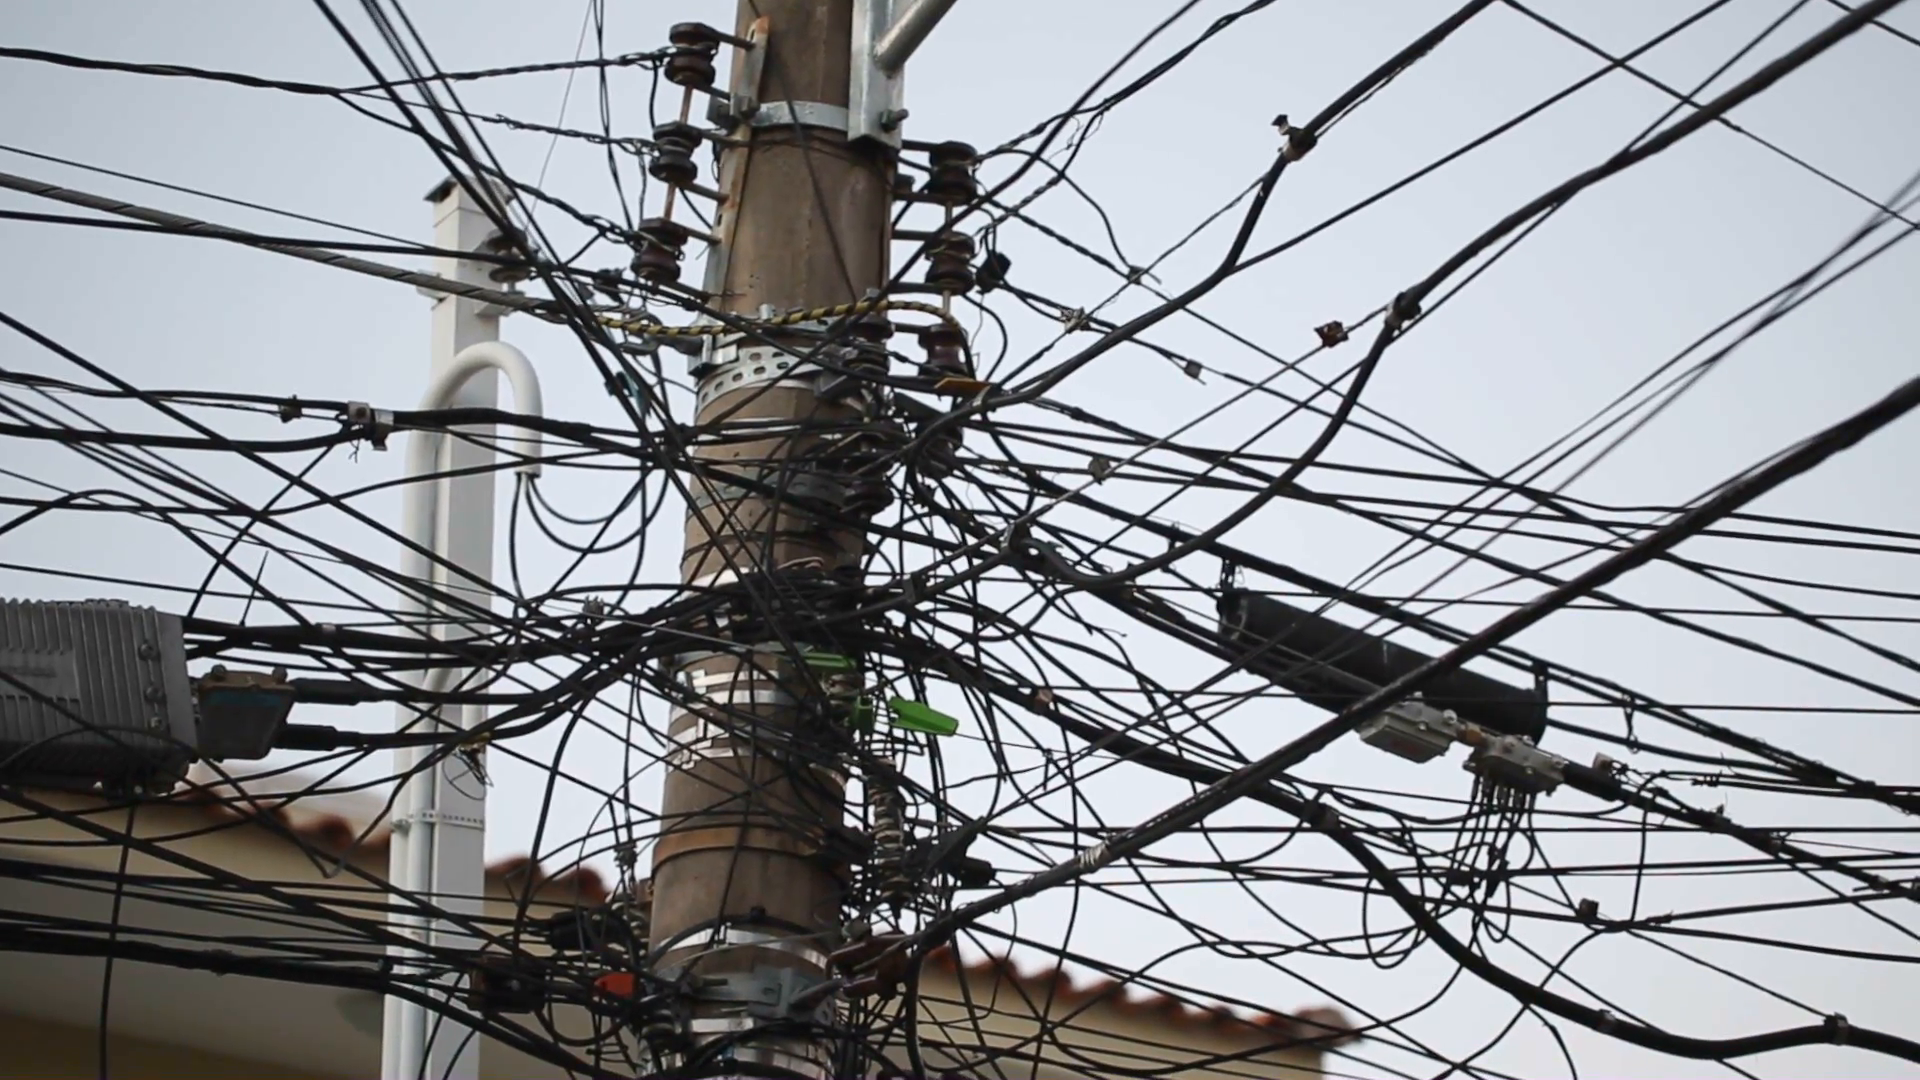 Third world country electrical wires. Disorganized electrical wiring ...